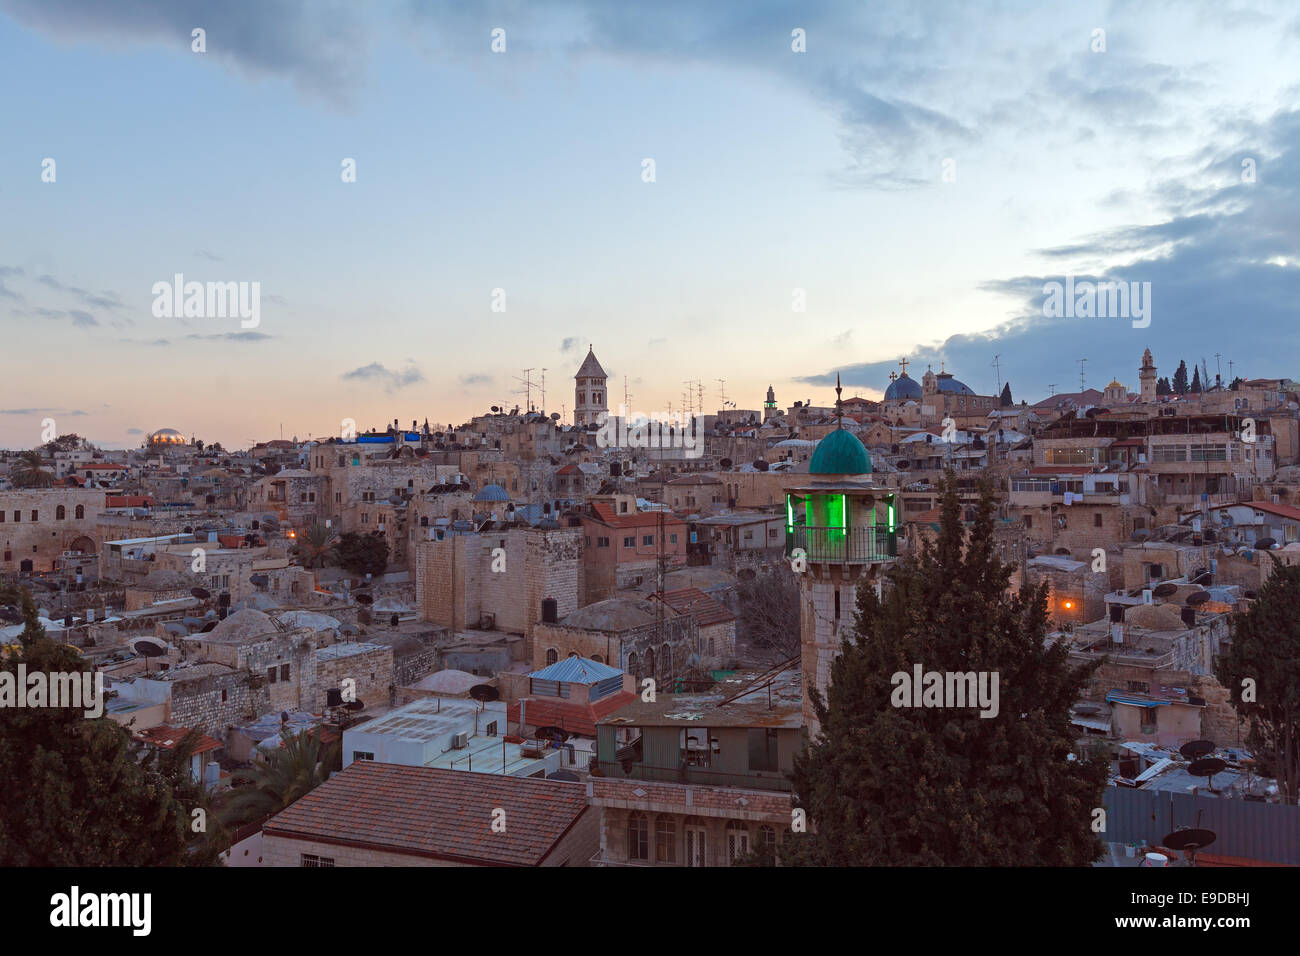 Jerusalem Old City and Temple Mount at Night, Israel Stock Photo